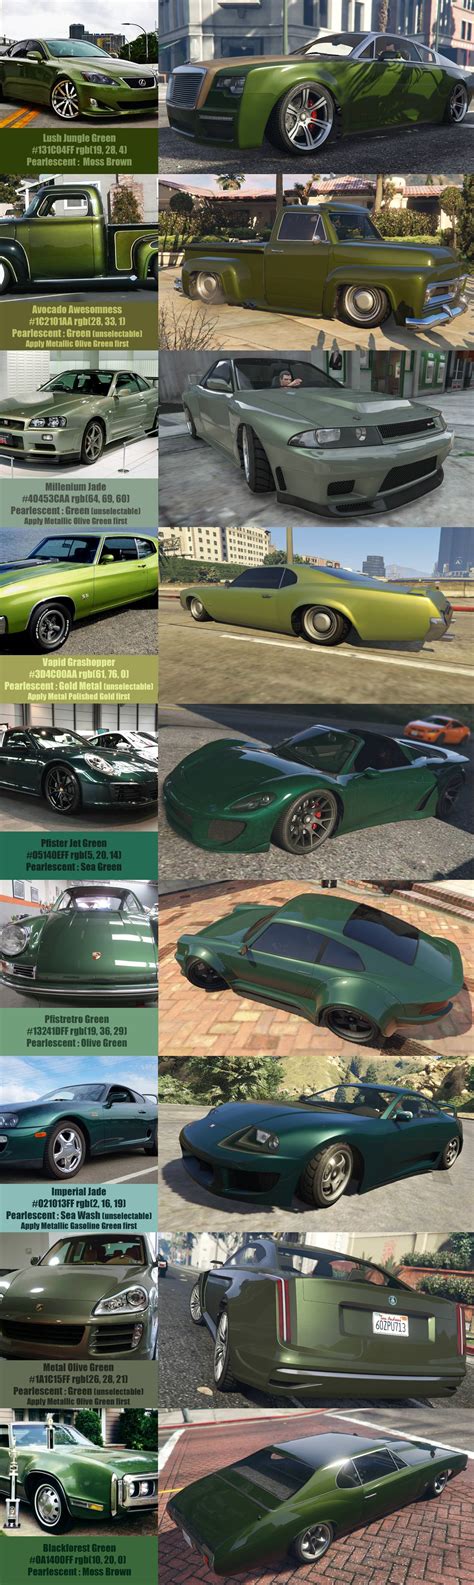 Cars and boats and planes, oh my! A dedicated forum to discuss the vehicles of GTA Online. . 